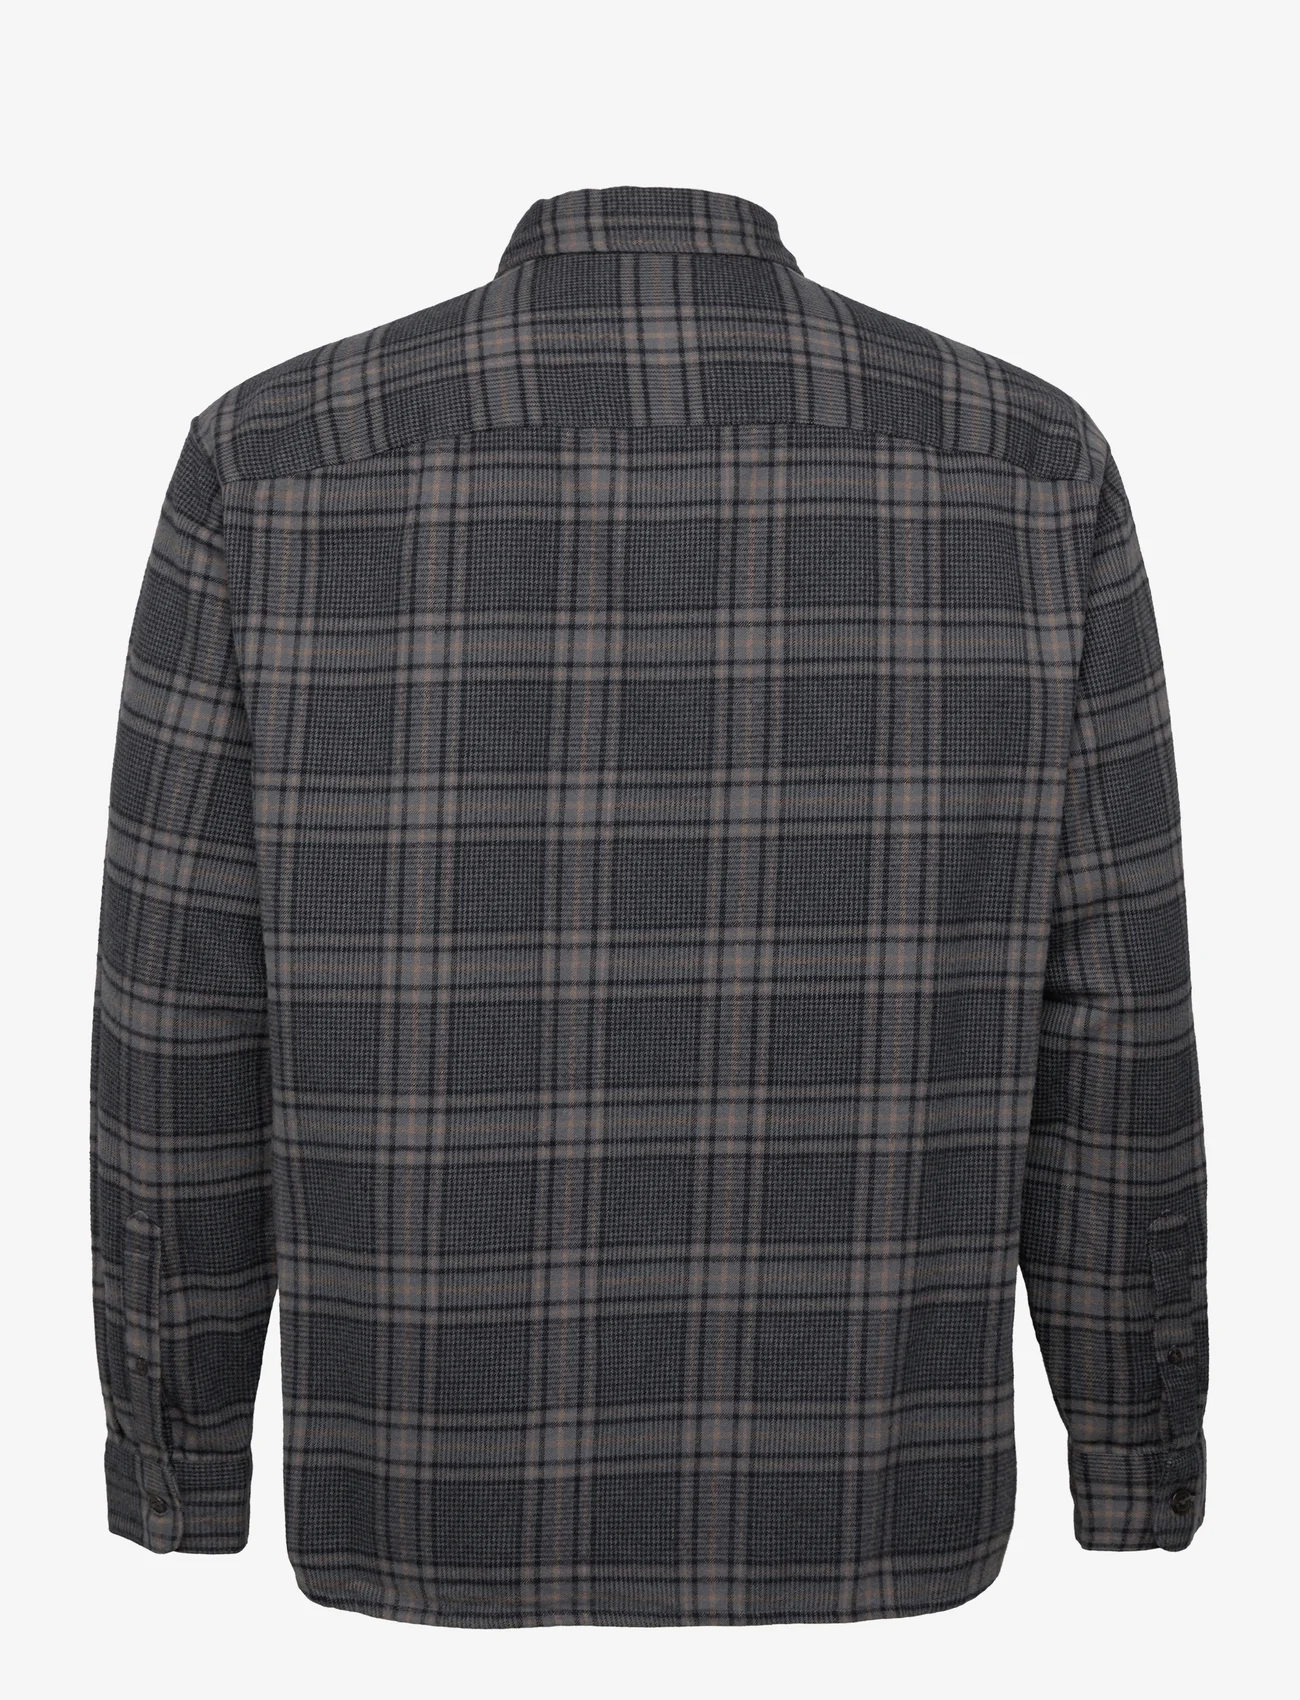 Abercrombie & Fitch - ANF MENS WOVENS - ruutupaidat - black plaid - 1